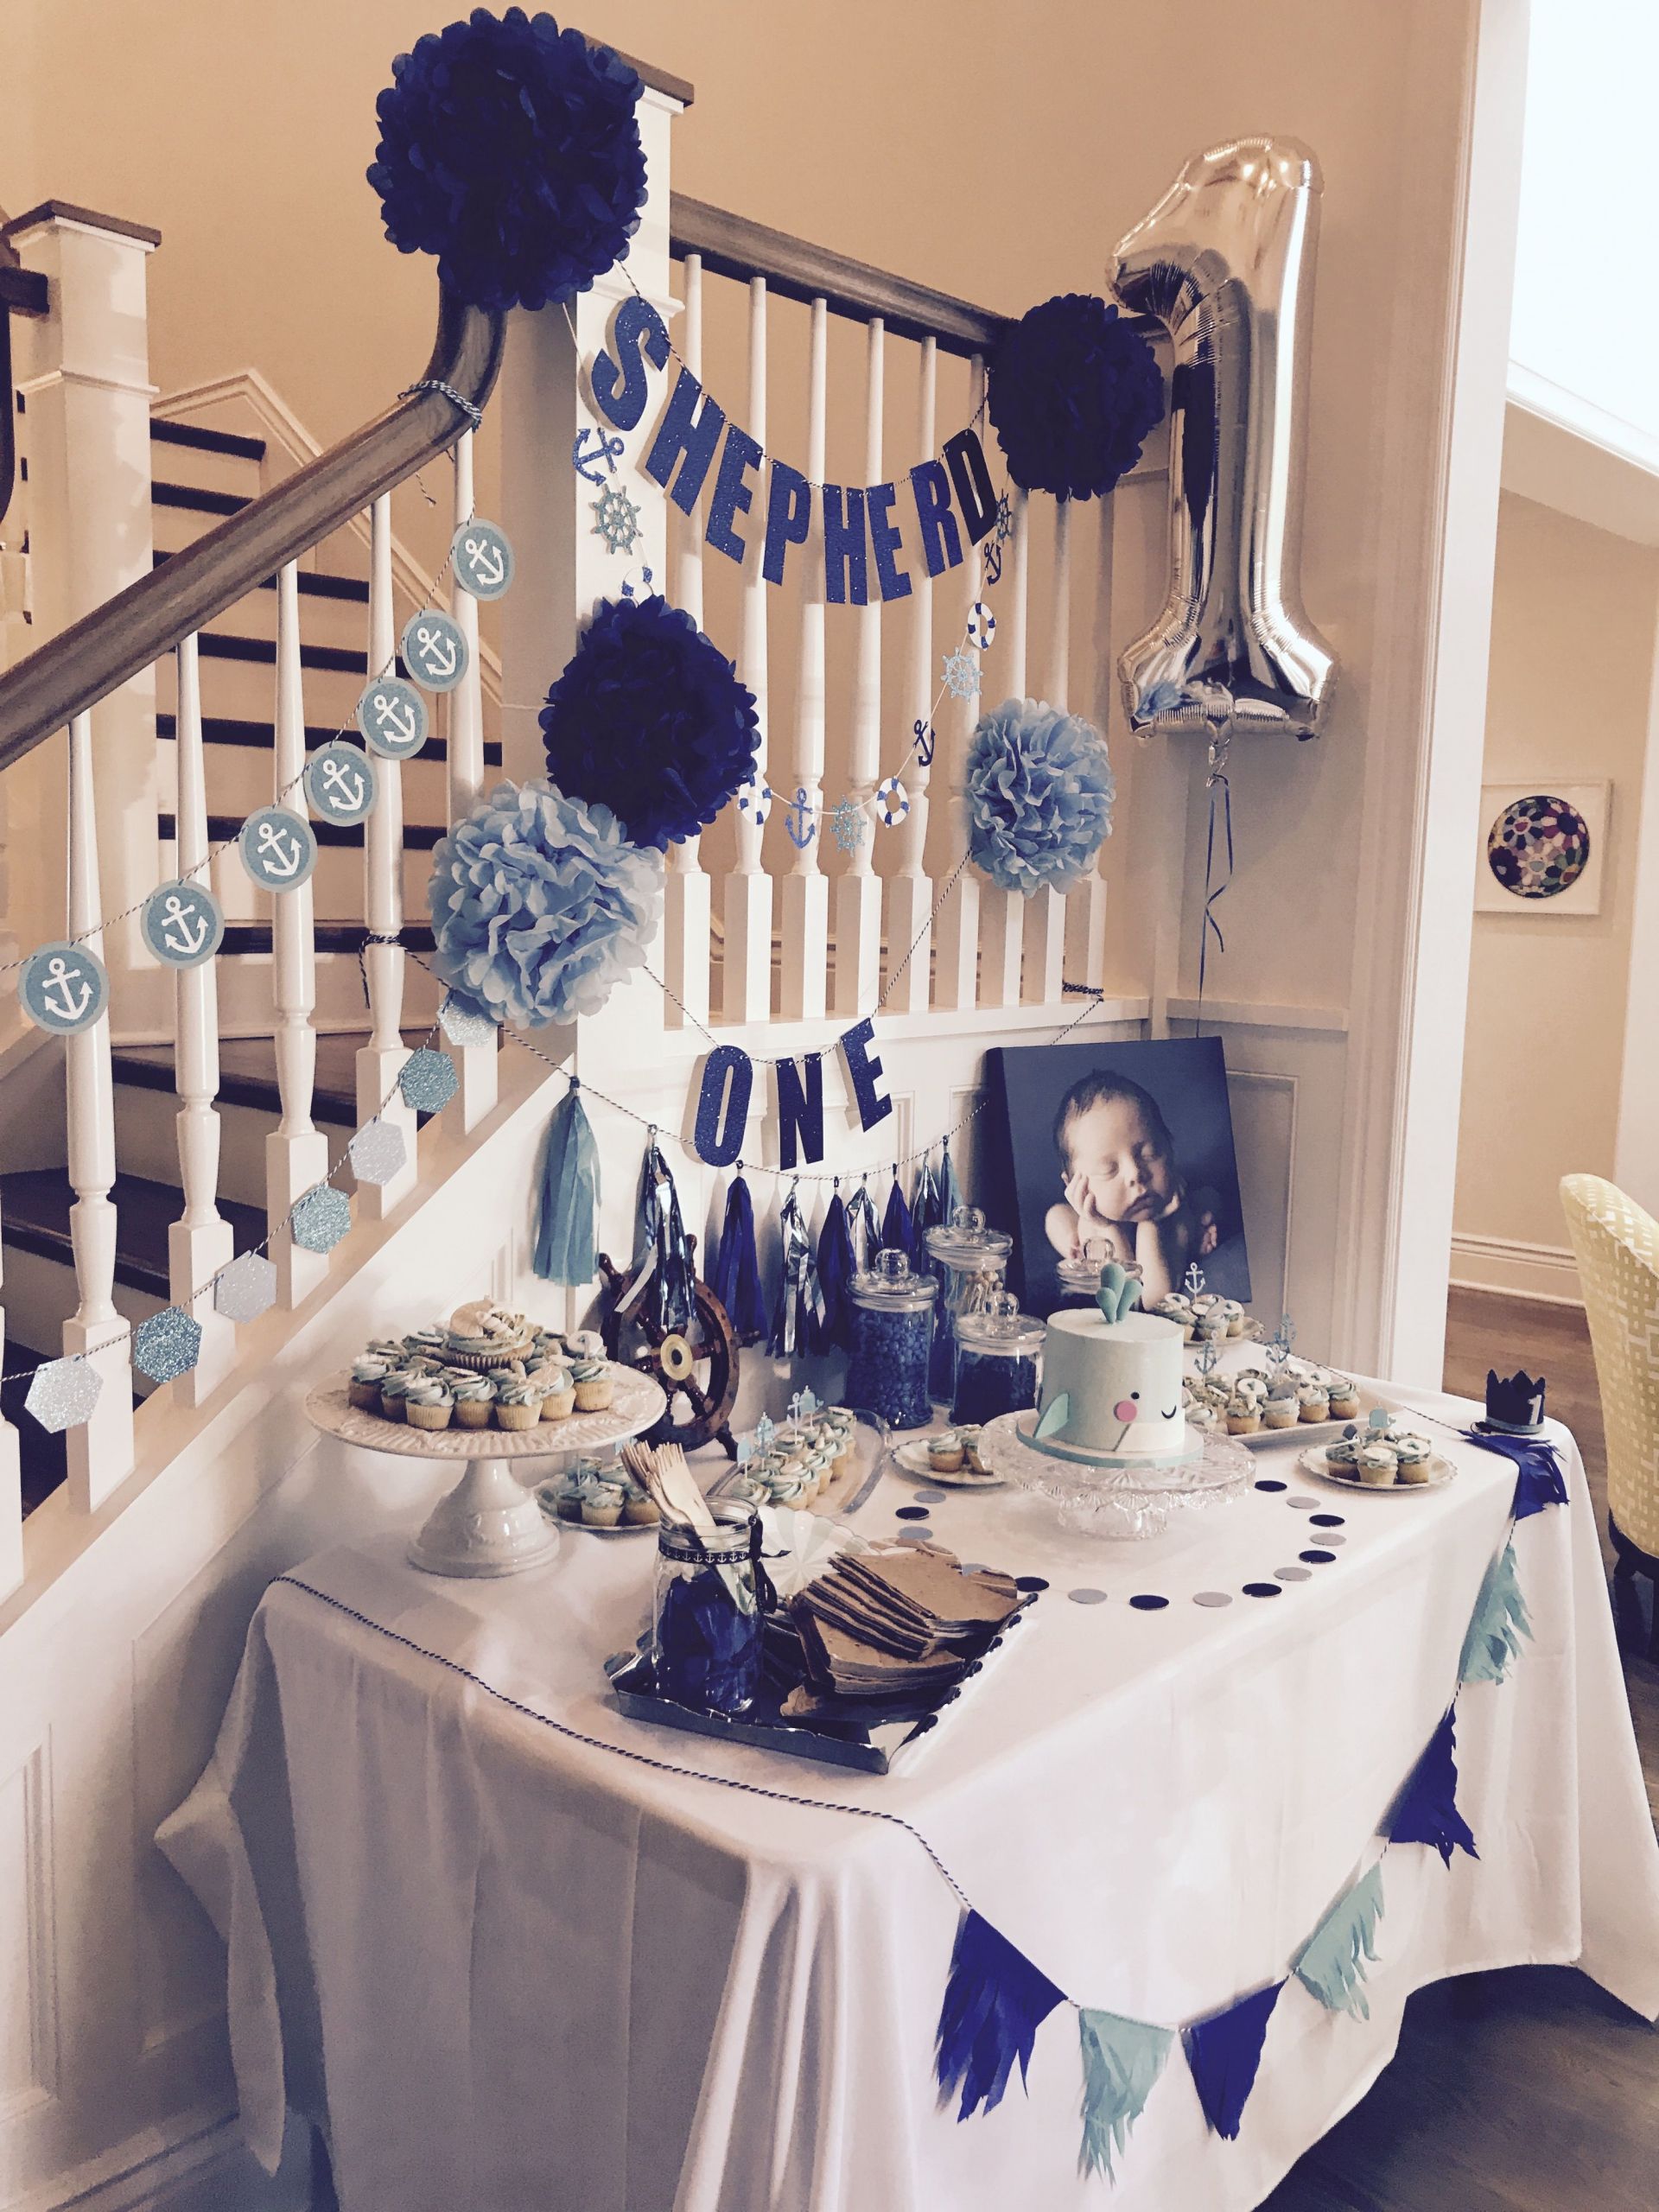 Baby Boy Birthday Decorations
 Dessert table for baby s first birthday